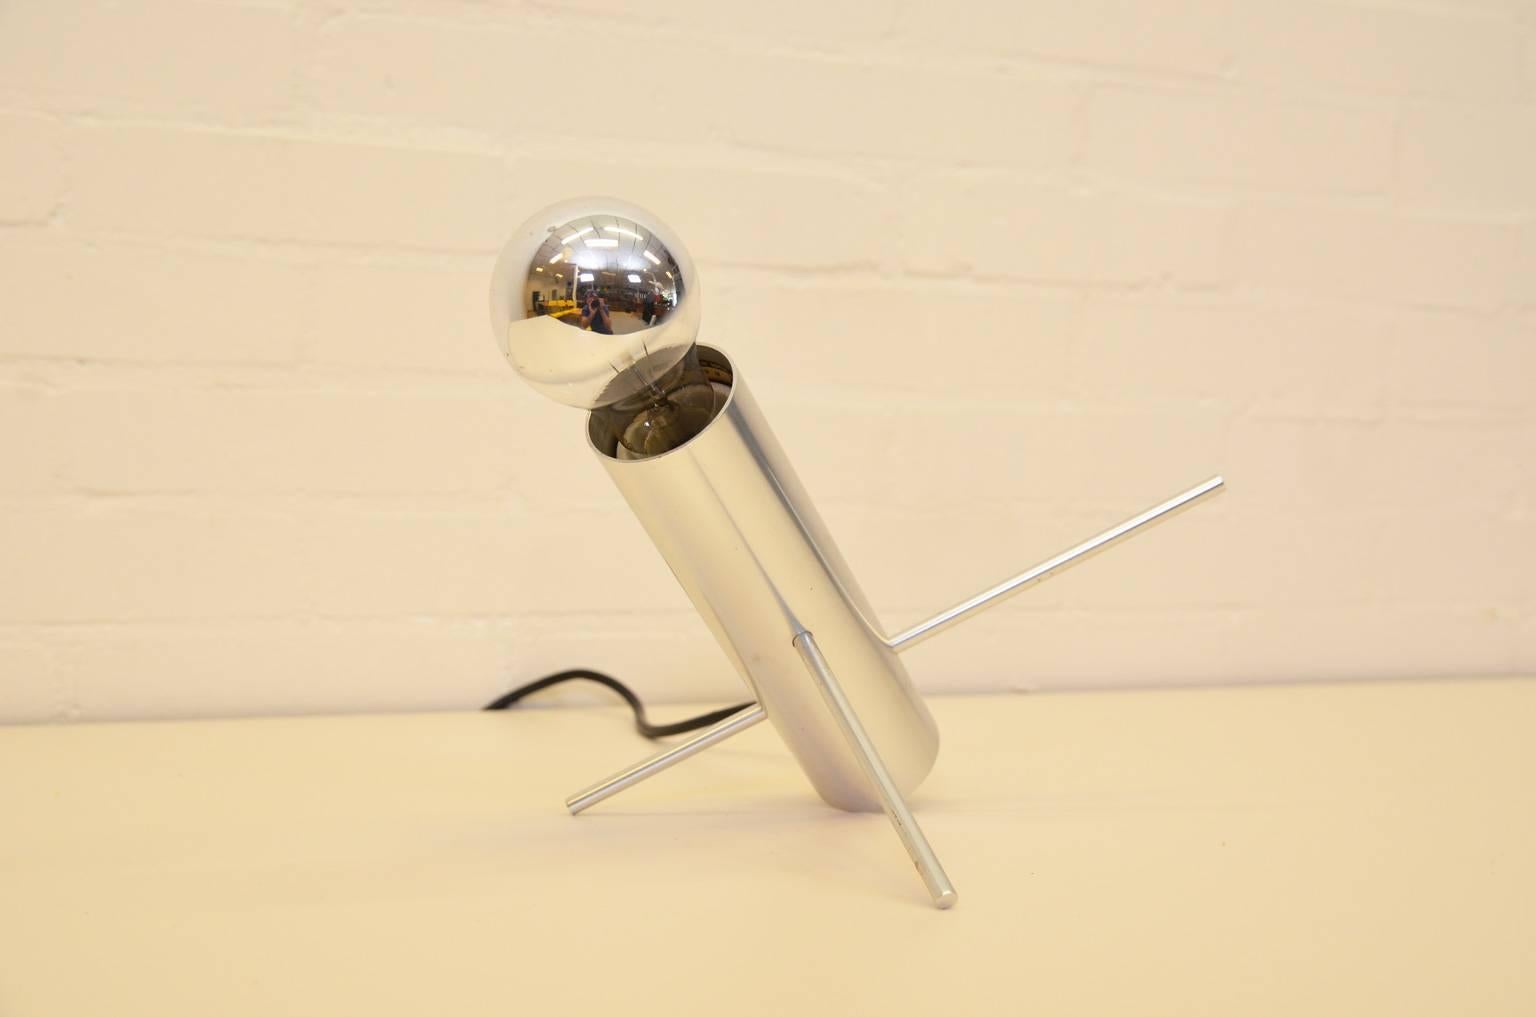 The cricket lamp model R60 by designer Otto Wach is made of a polished metal tube containing two metal pins. By adjusting these metal pins the lamp can be put in different positions. Manufactured by RAAK Amsterdam. Marked inside the base (image 10).